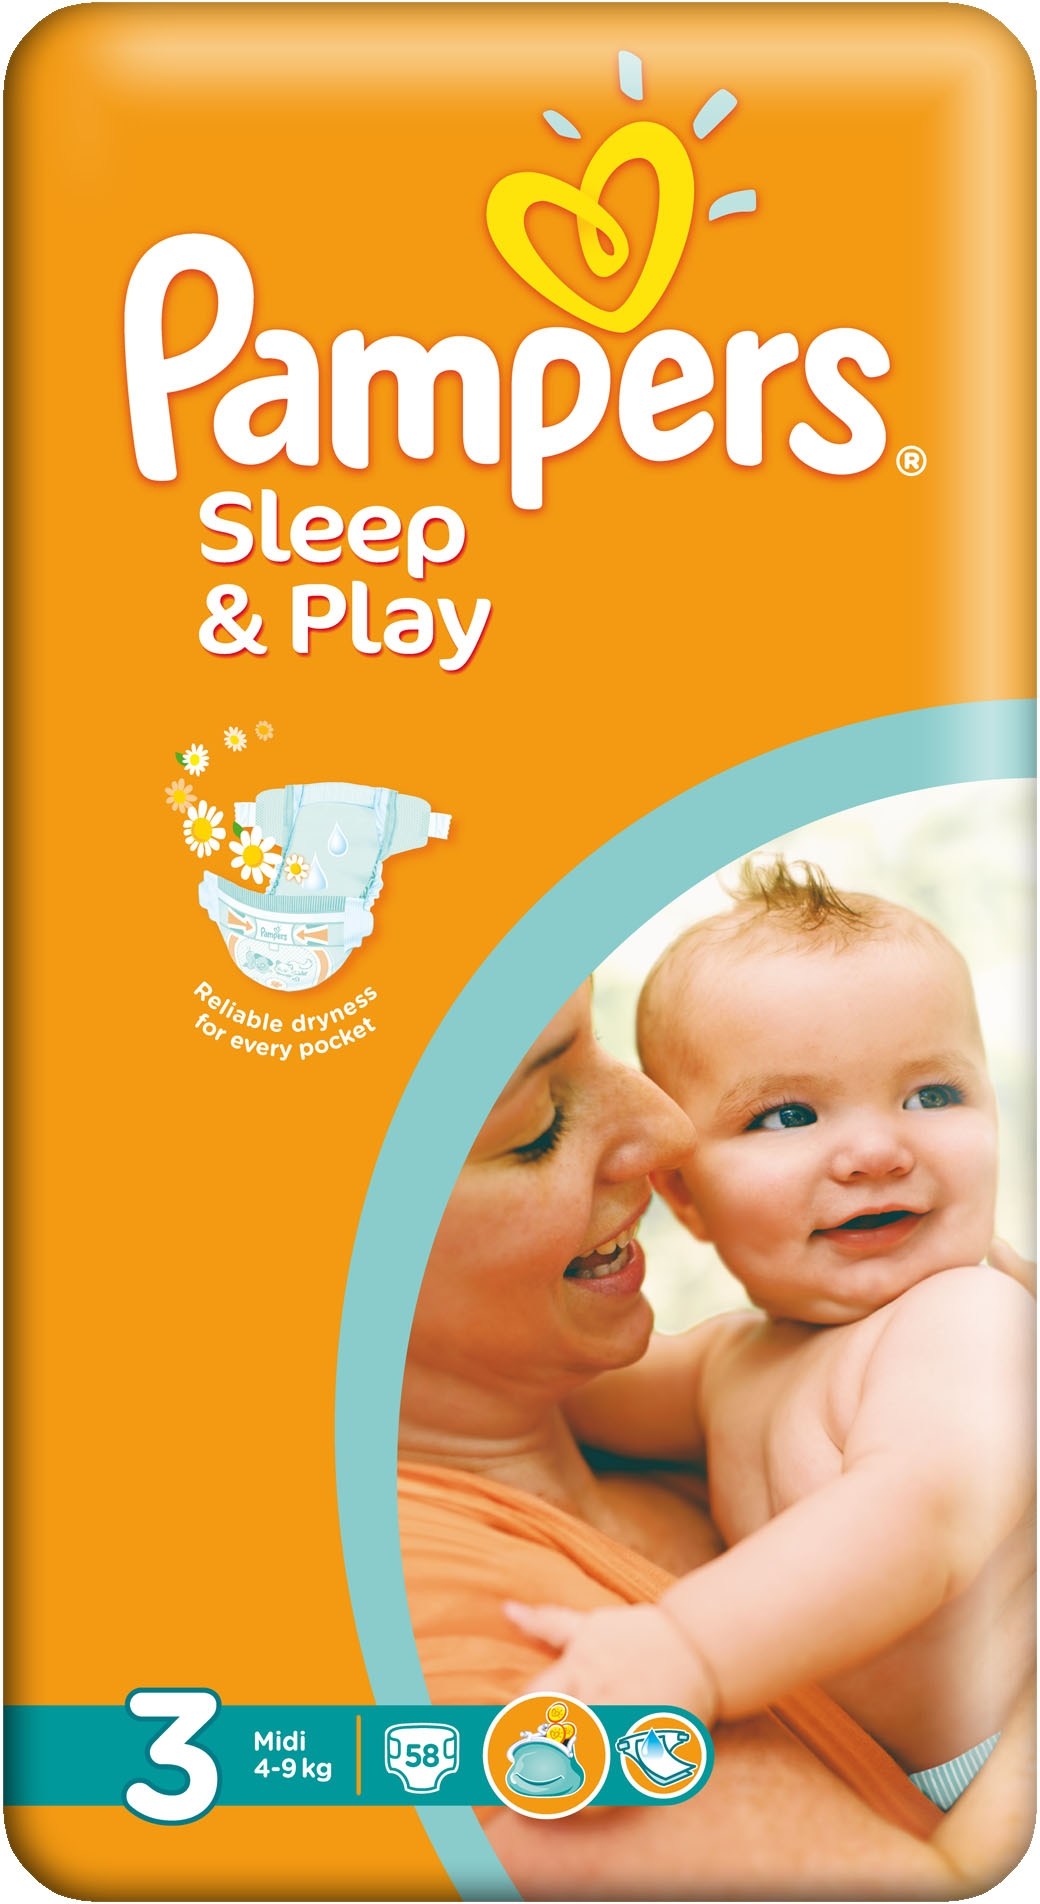 headphones with pampers